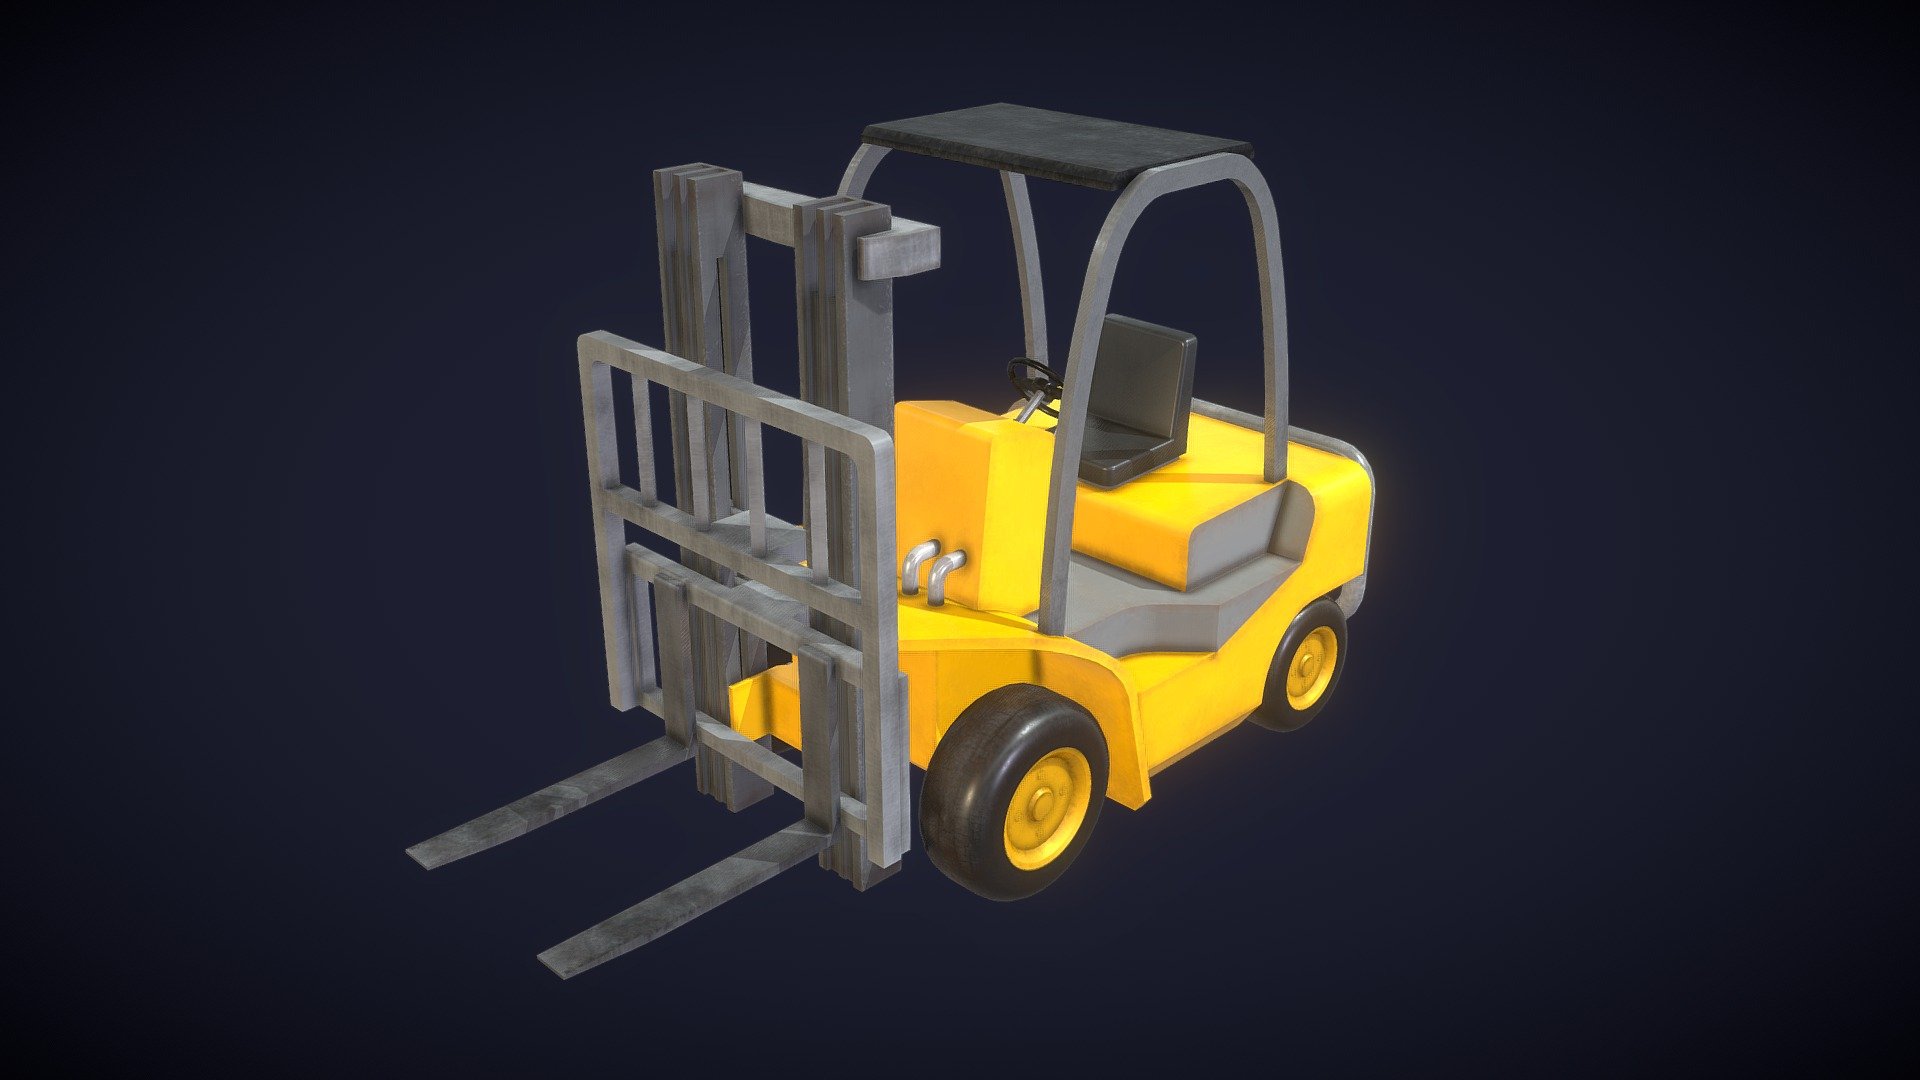 Game-ready lowpoly model of an industrial forklift which is easy to implement in your game, this model can also be used for commercial or other purposes. Don't worry about licencing because this model is completely royalty-free, which means you can use it for anything without giving credit.

Textures are included at 4k resolution!

Features




High quality forklift 3d model

BaseColor

Roughness map

Metallic map

(Please contact me if you need a different format.) - Industrial Forklift Lowpoly 3D-Model - Buy Royalty Free 3D model by Polycat Games (@polycatgames) 3d model